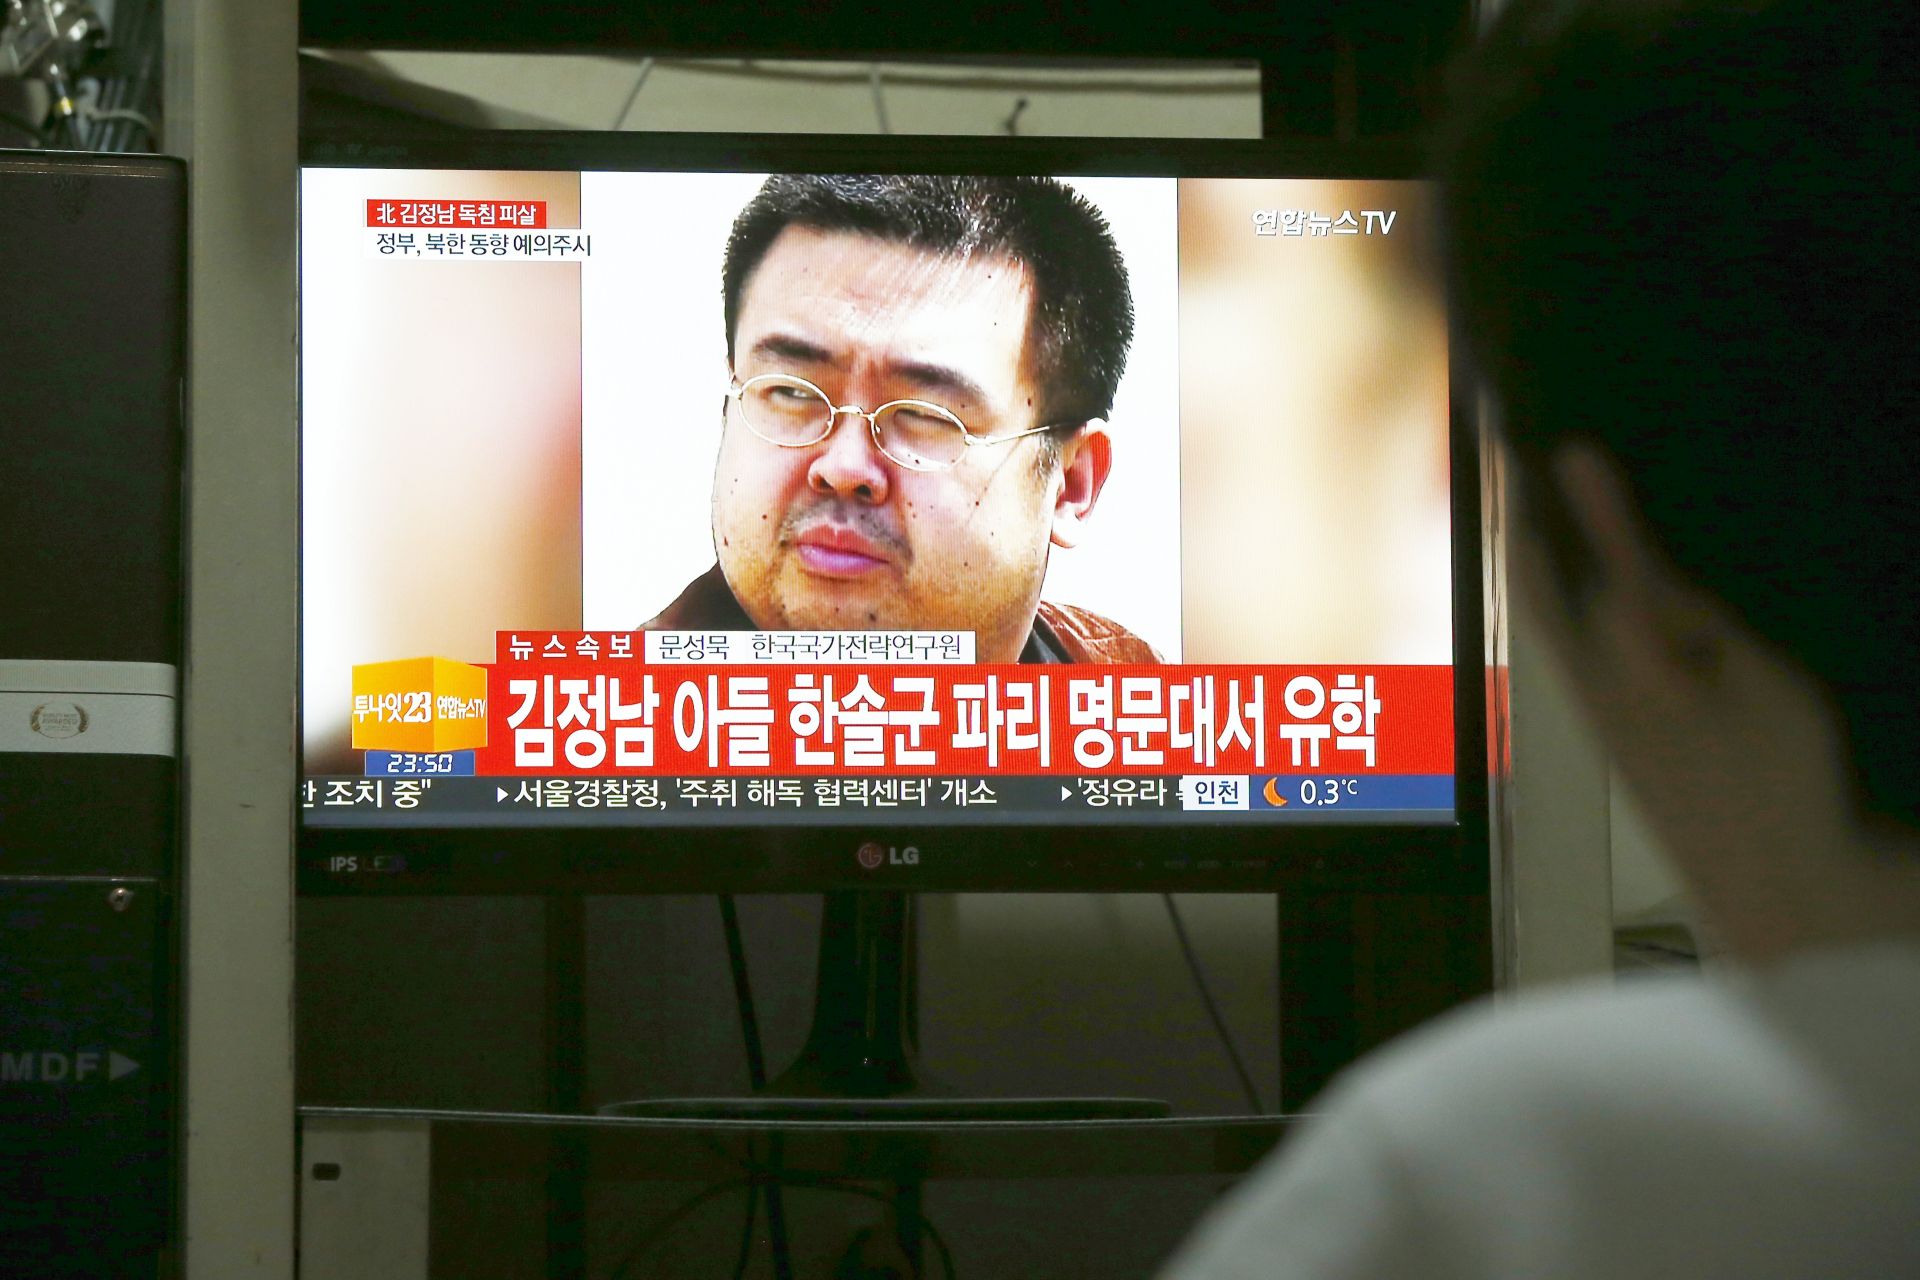 epa05792910 A South Korean man watches TV showing breaking news about the alleged assassination of North Korean leader Kim Jong-un's half-brother, at a home in Pyeongchang, Gangwon-do, South Korea, 14 February 2017. According to South Korean media reports on 14 February 2017, Kim Jong Nam, the half-brother of North Korean leader Kim Jong-un, has apparently been assassinated by unknown persons at the Kuala Lumpur airport. He reportedly immigrated to China in 1995, and has since then lived there under Chinese protection.  EPA/JEON HEON-KYUN